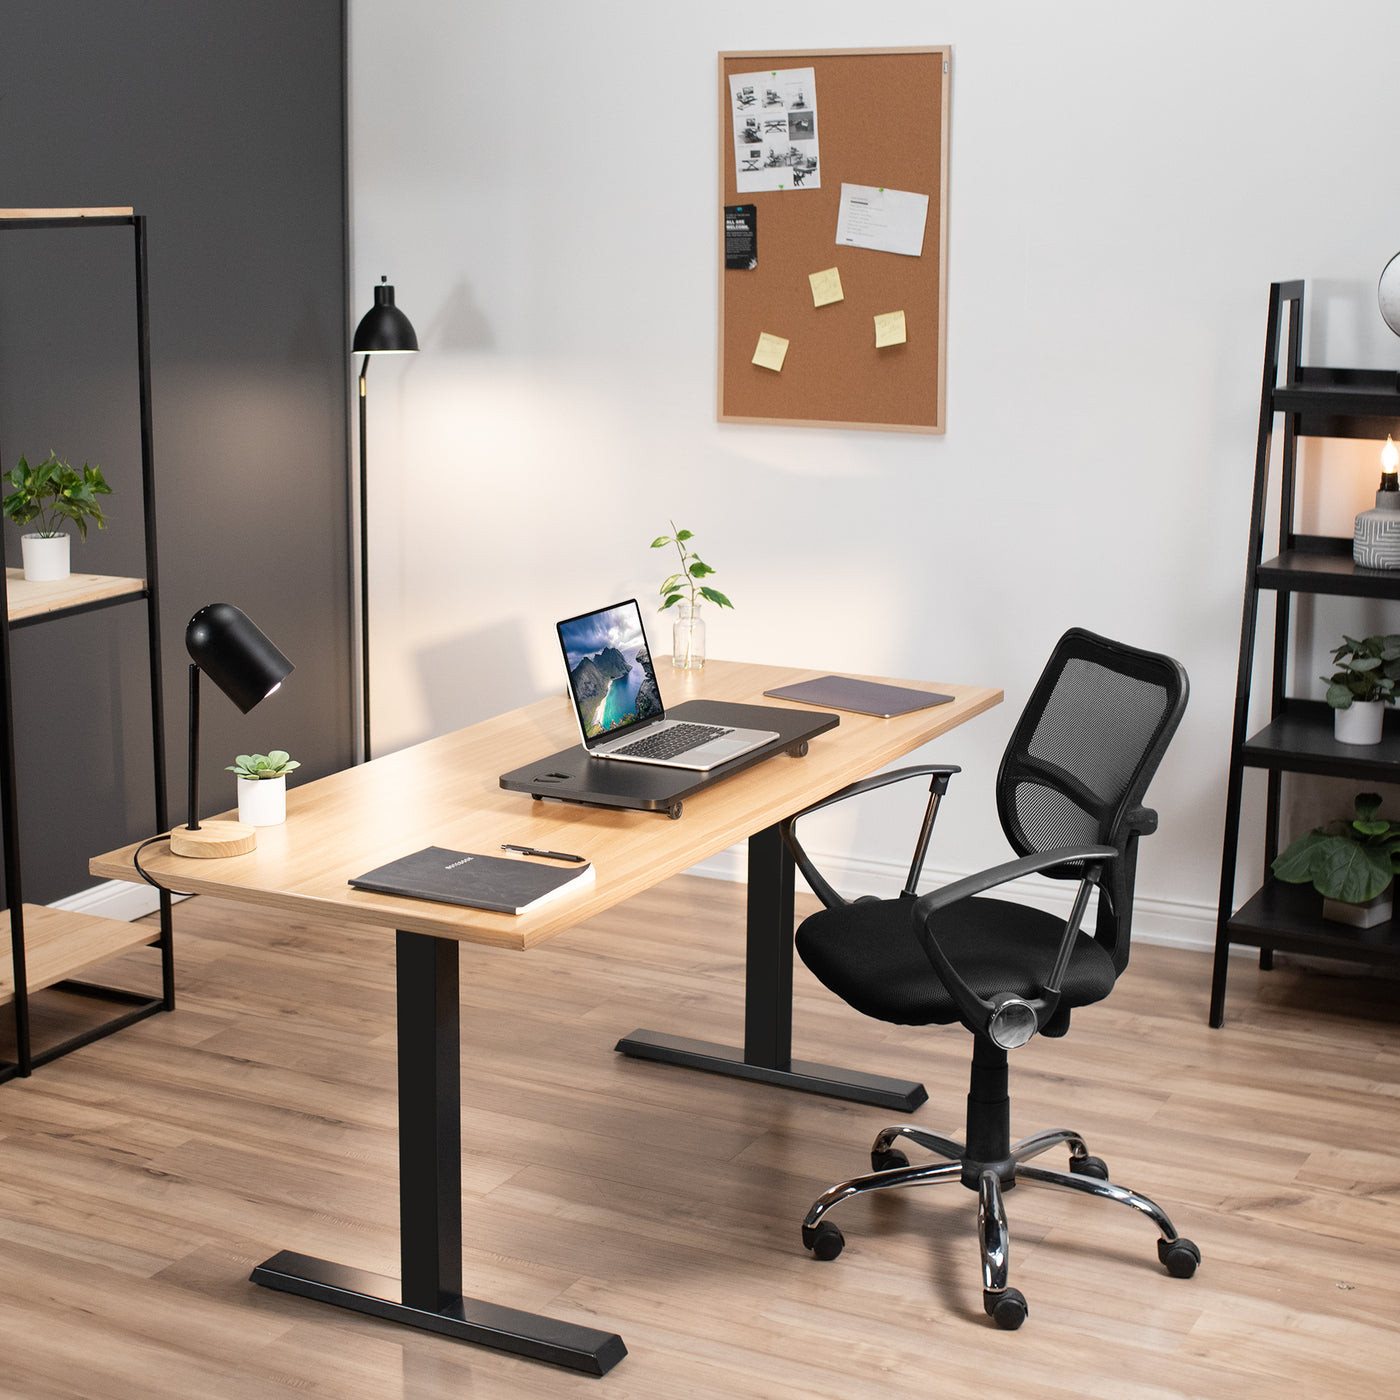 Fully furnished modern workspace from VIVO technologies.